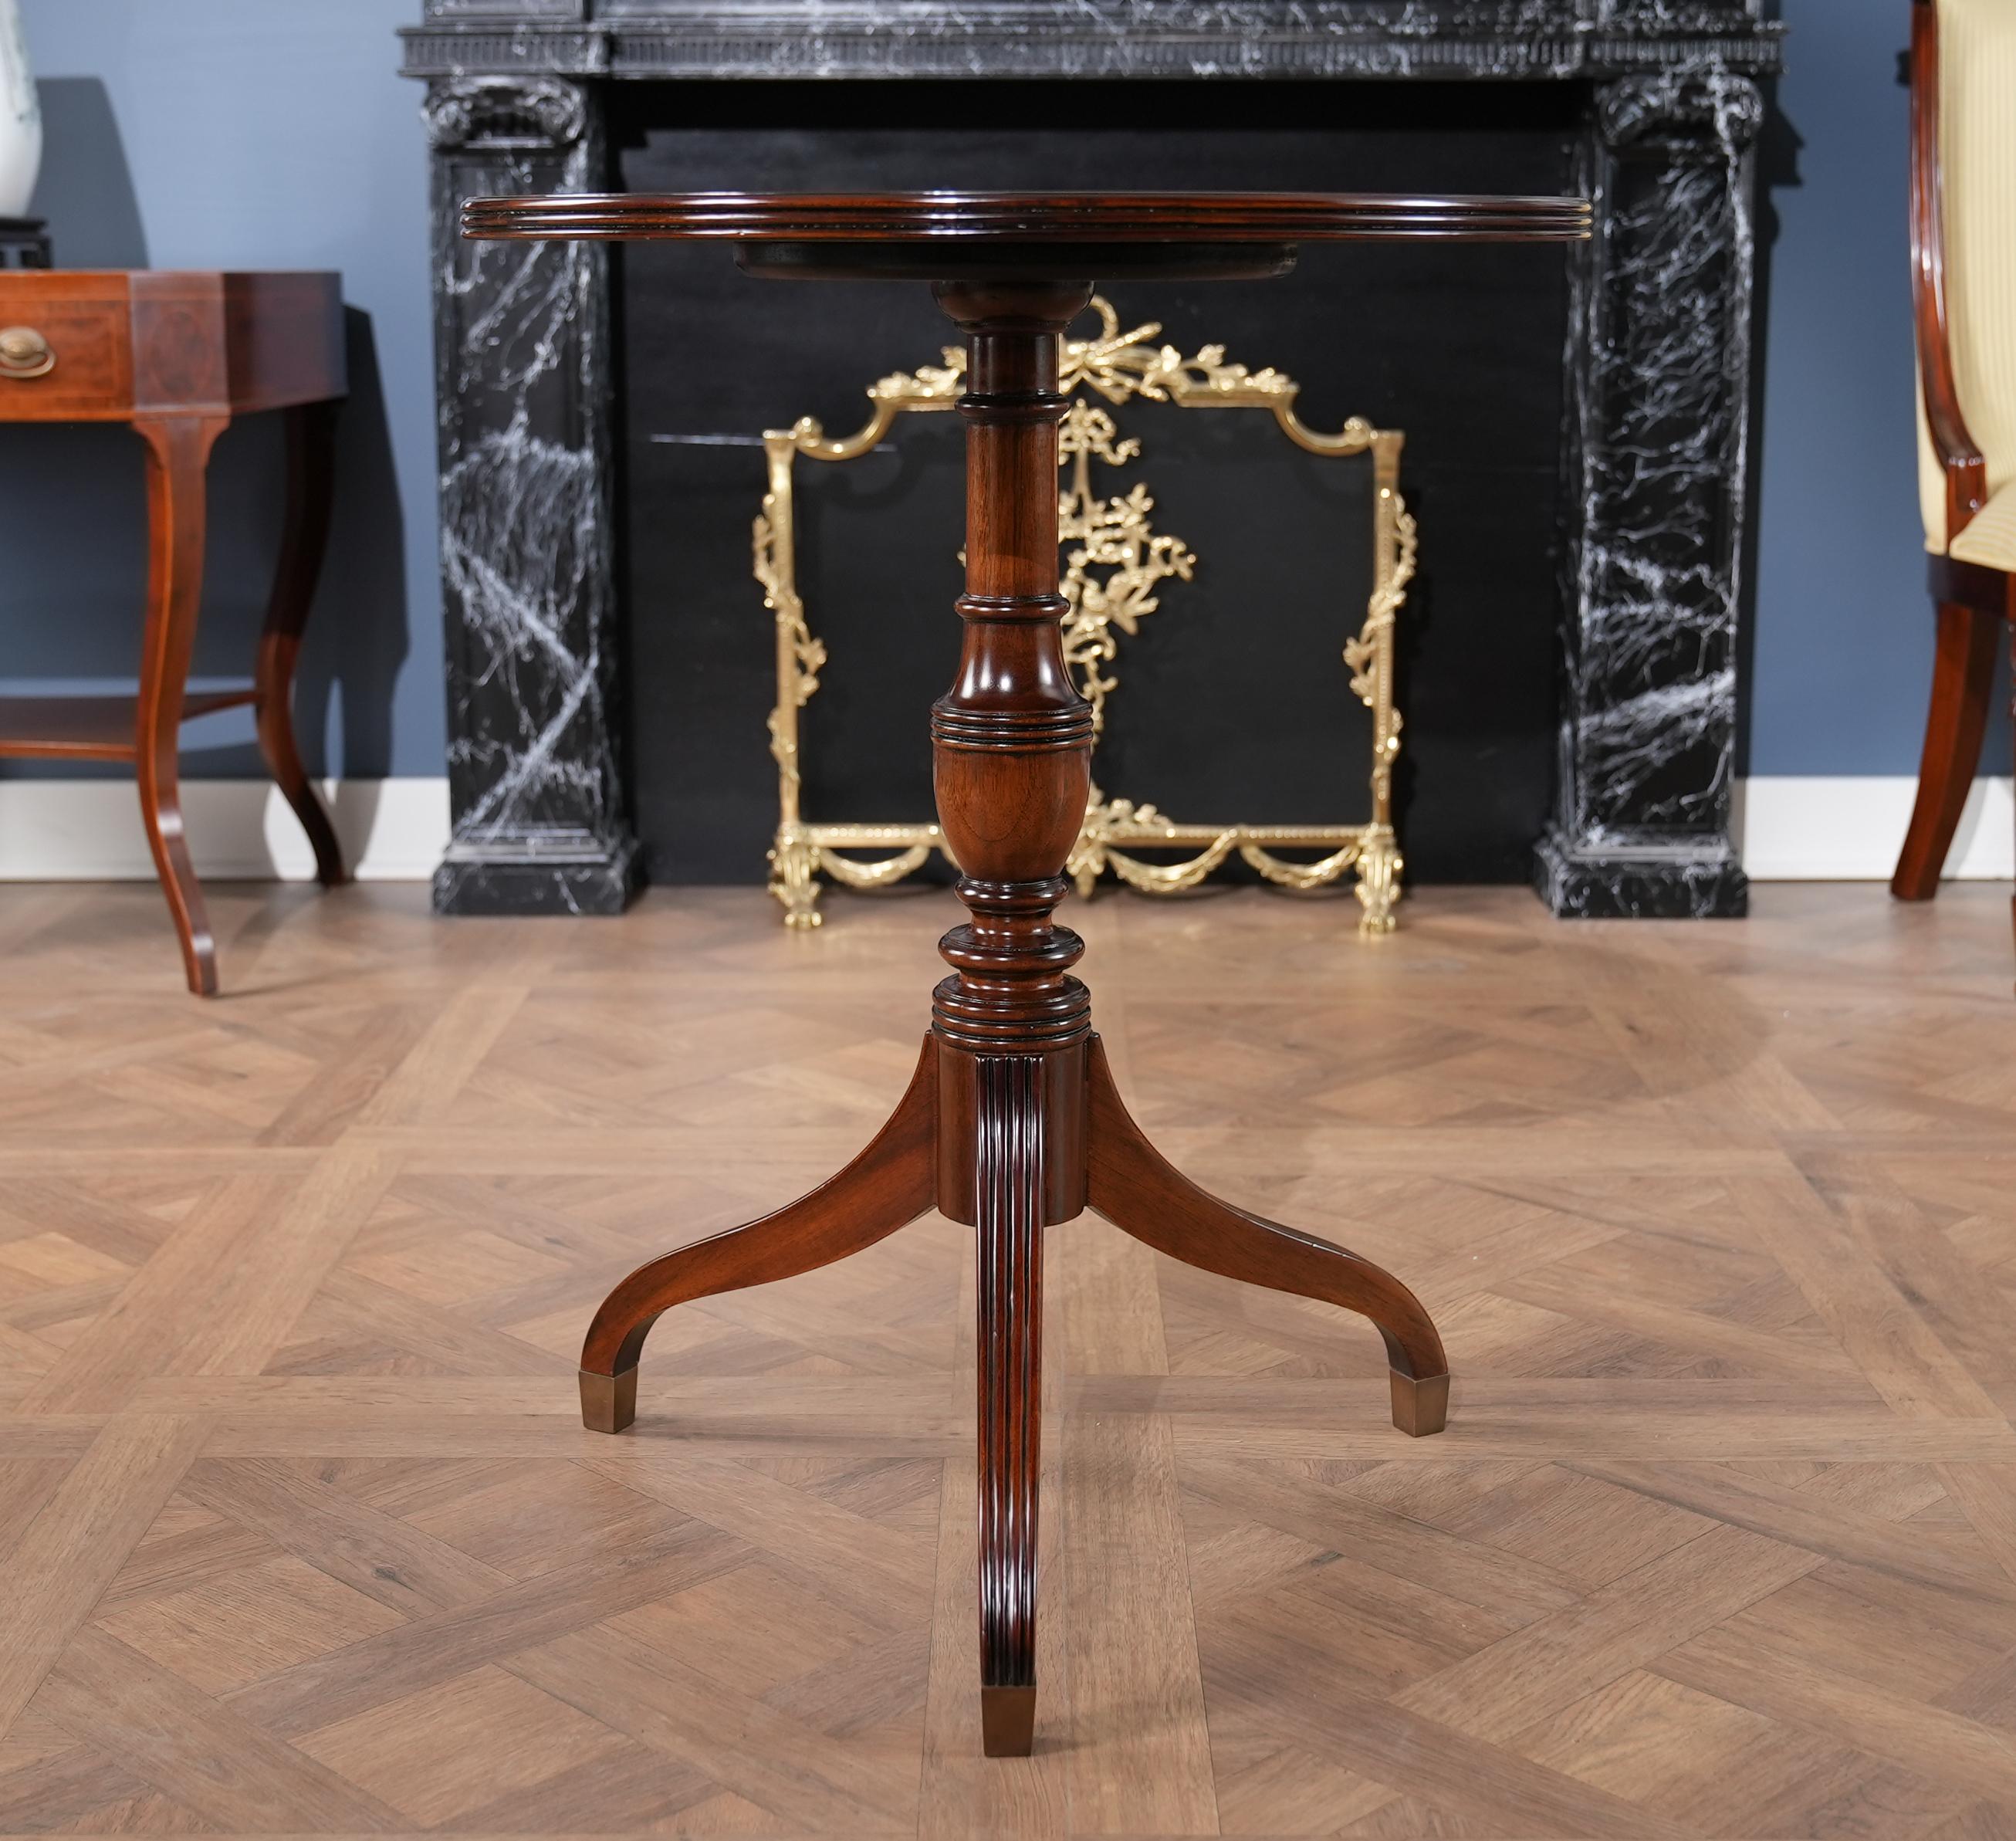 A high quality, Round Mahogany Table with Reeded Edge produced by Niagara Furniture. Beautifully shaped and banded top surrounded by sapele veneers, the entire table supported by three curved and shaped solid mahogany legs, dovetailed into the